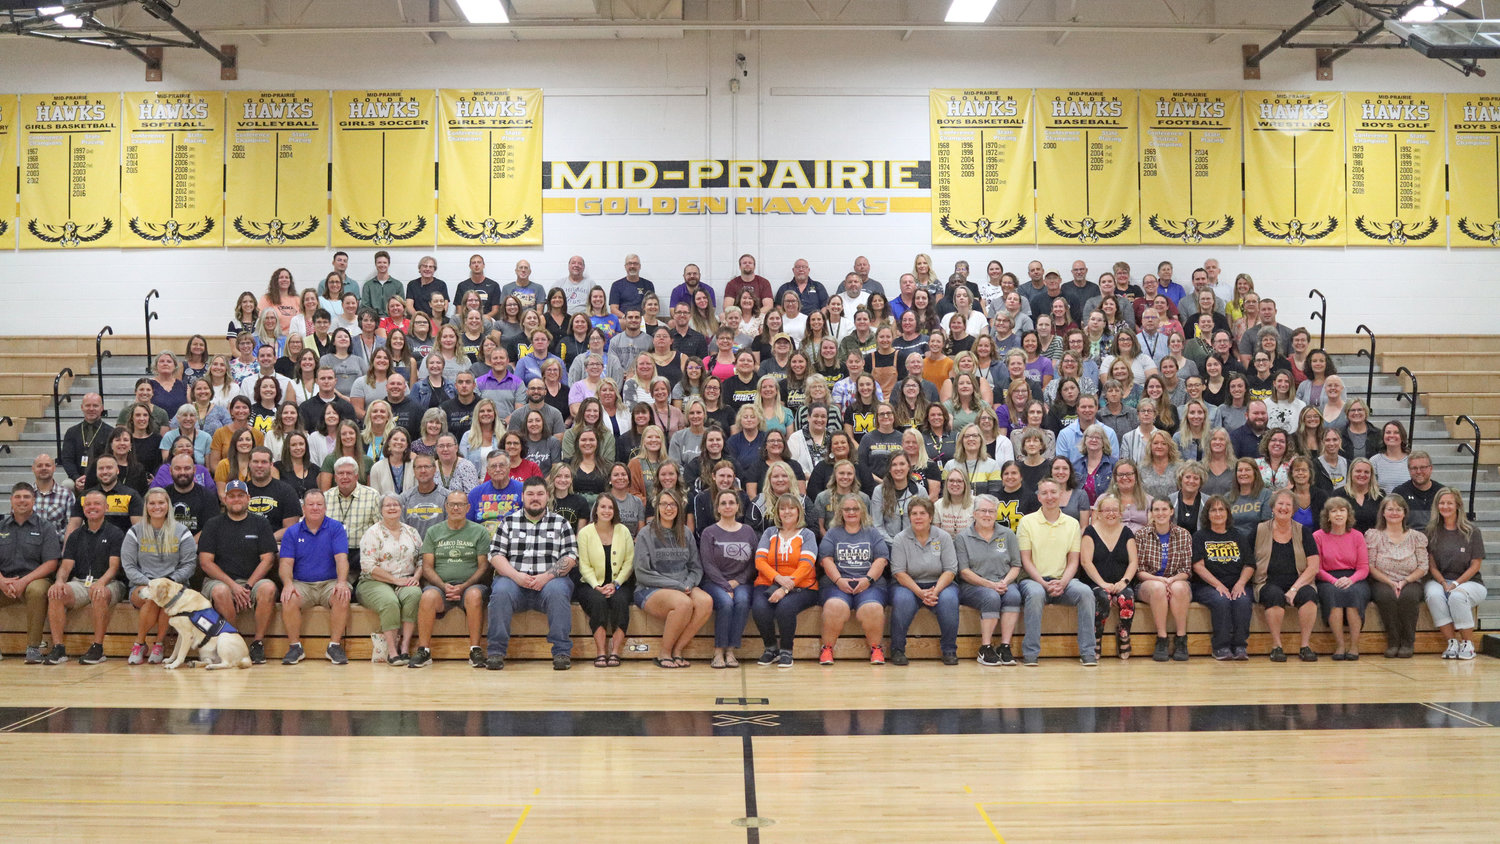 Mid-Prairie’s full staff assembles in the gym before the start of a new school year.